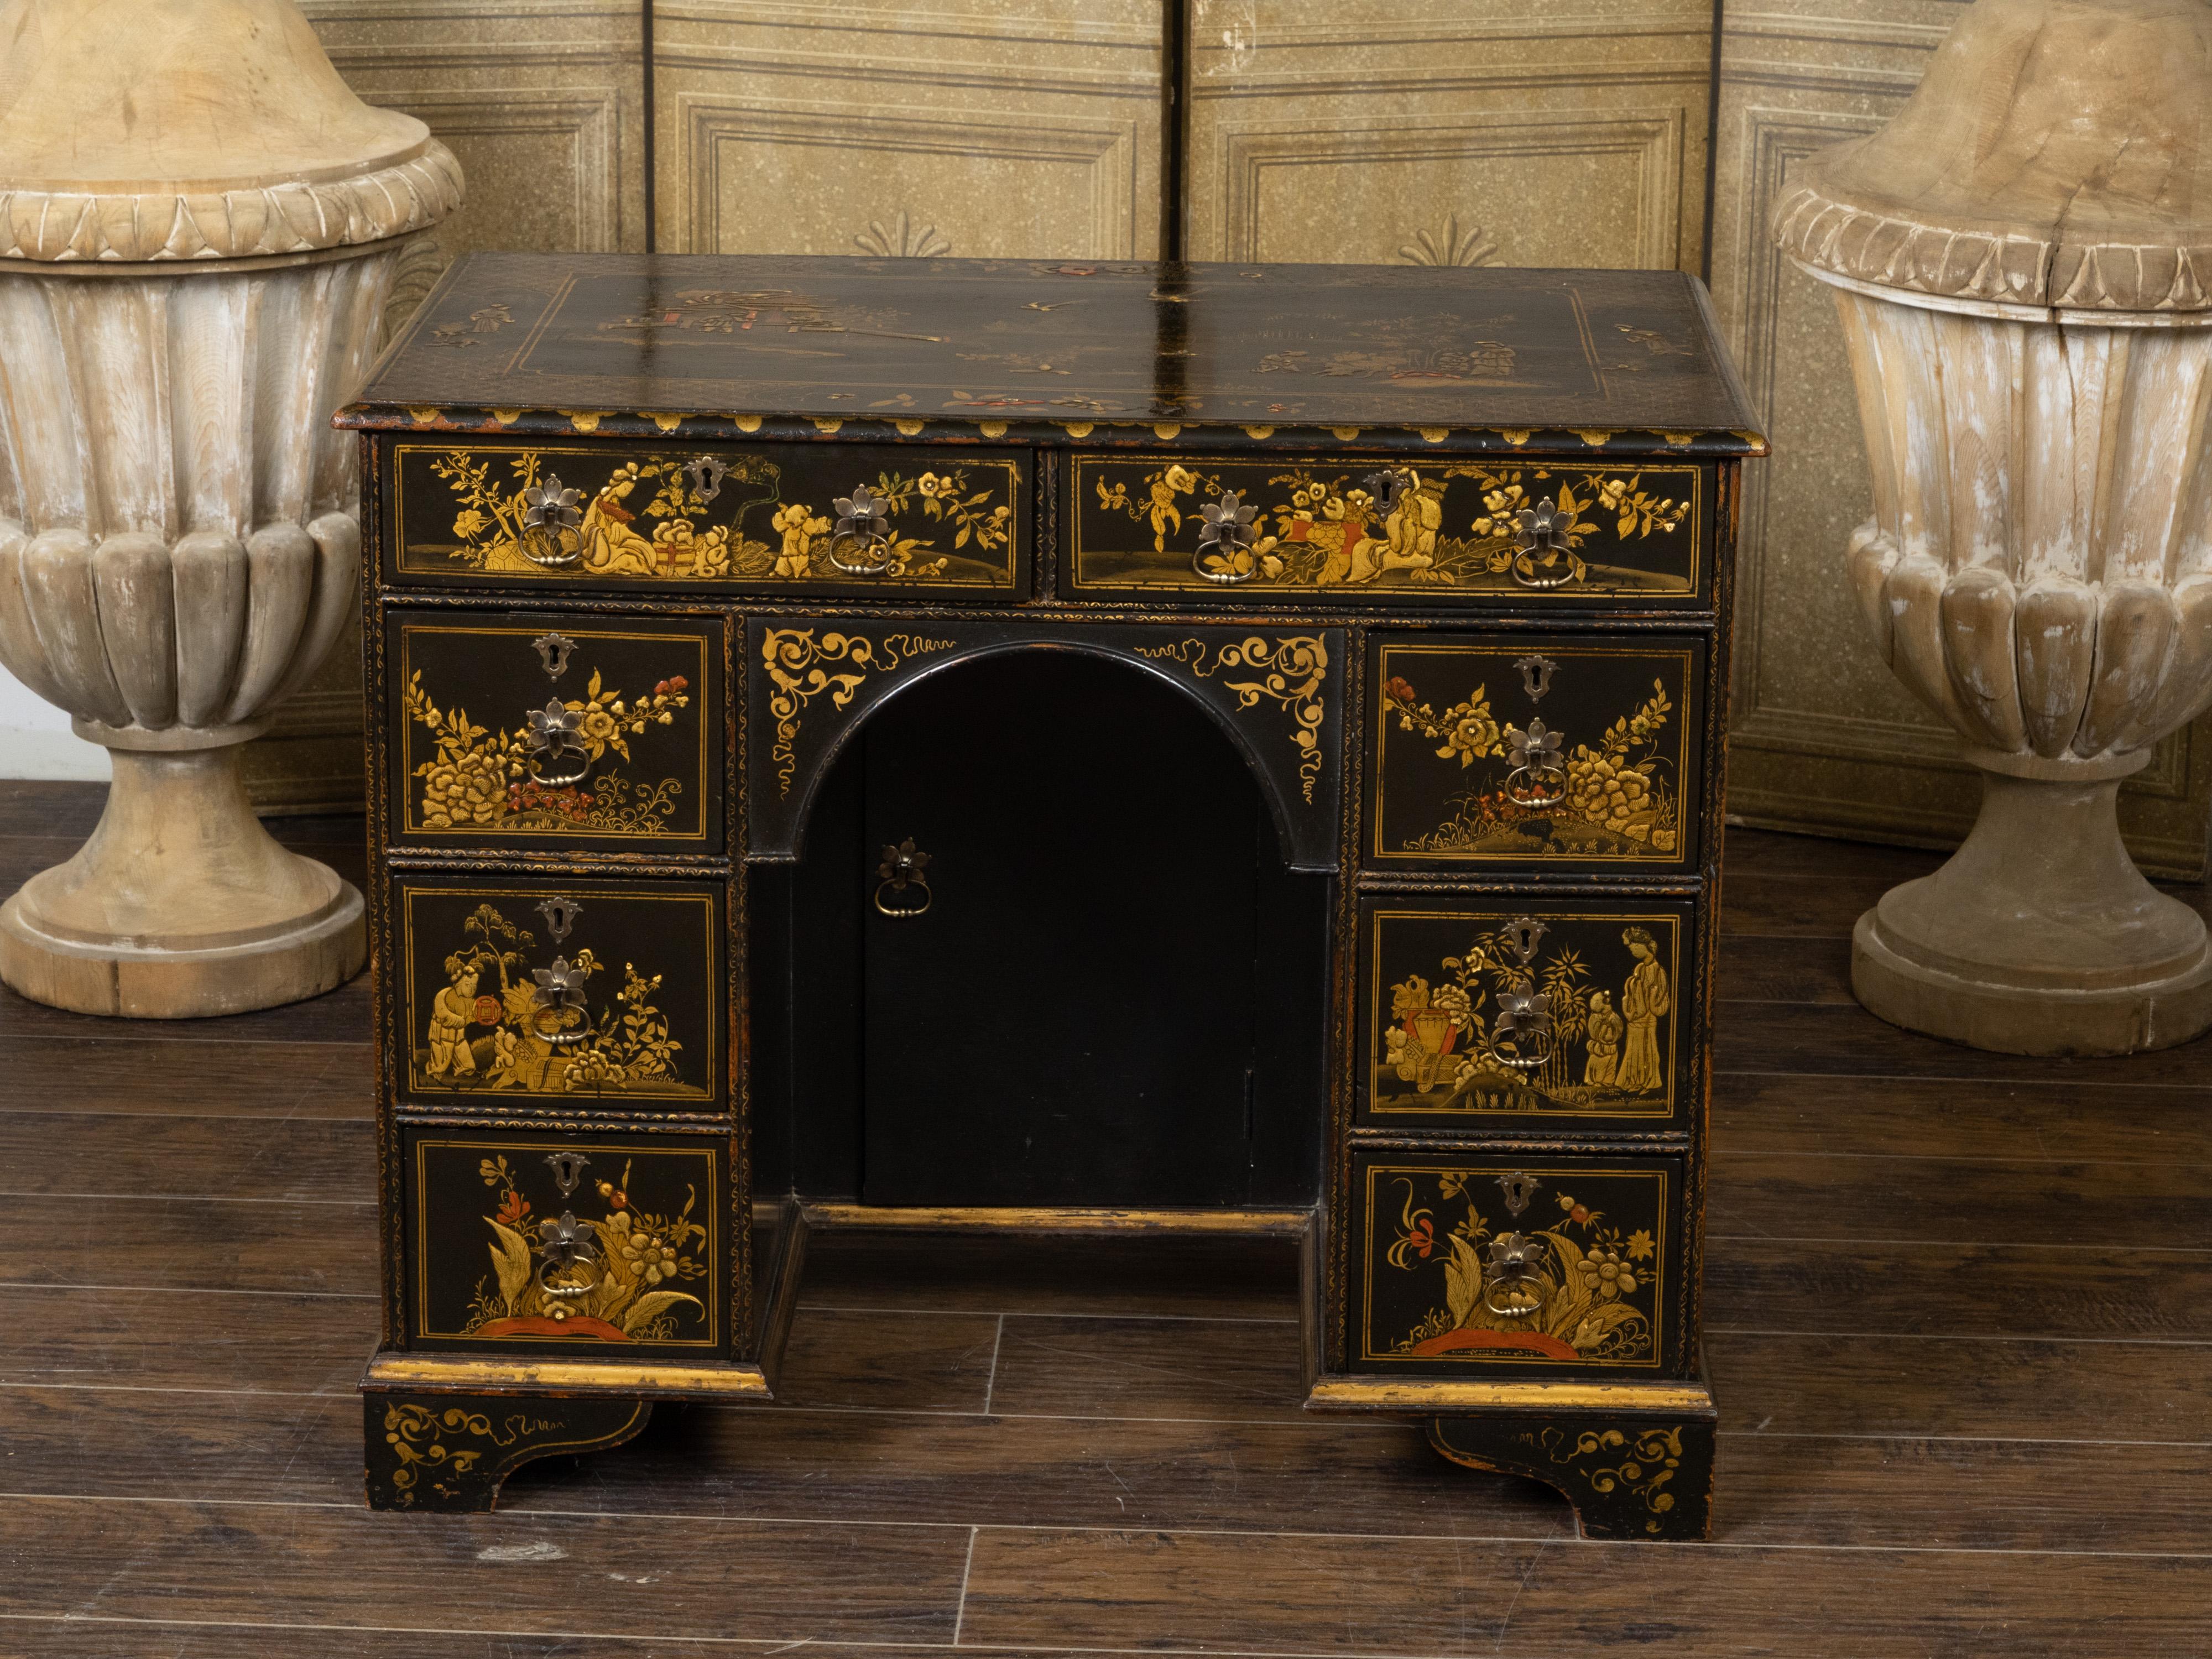 An English japanned kneehole desk from the 19th century with black and gold Chinoiserie décor, eight drawers and central door. Perfect to be used as a small desk or a dressing table, this English table from the 19th century captures our attention